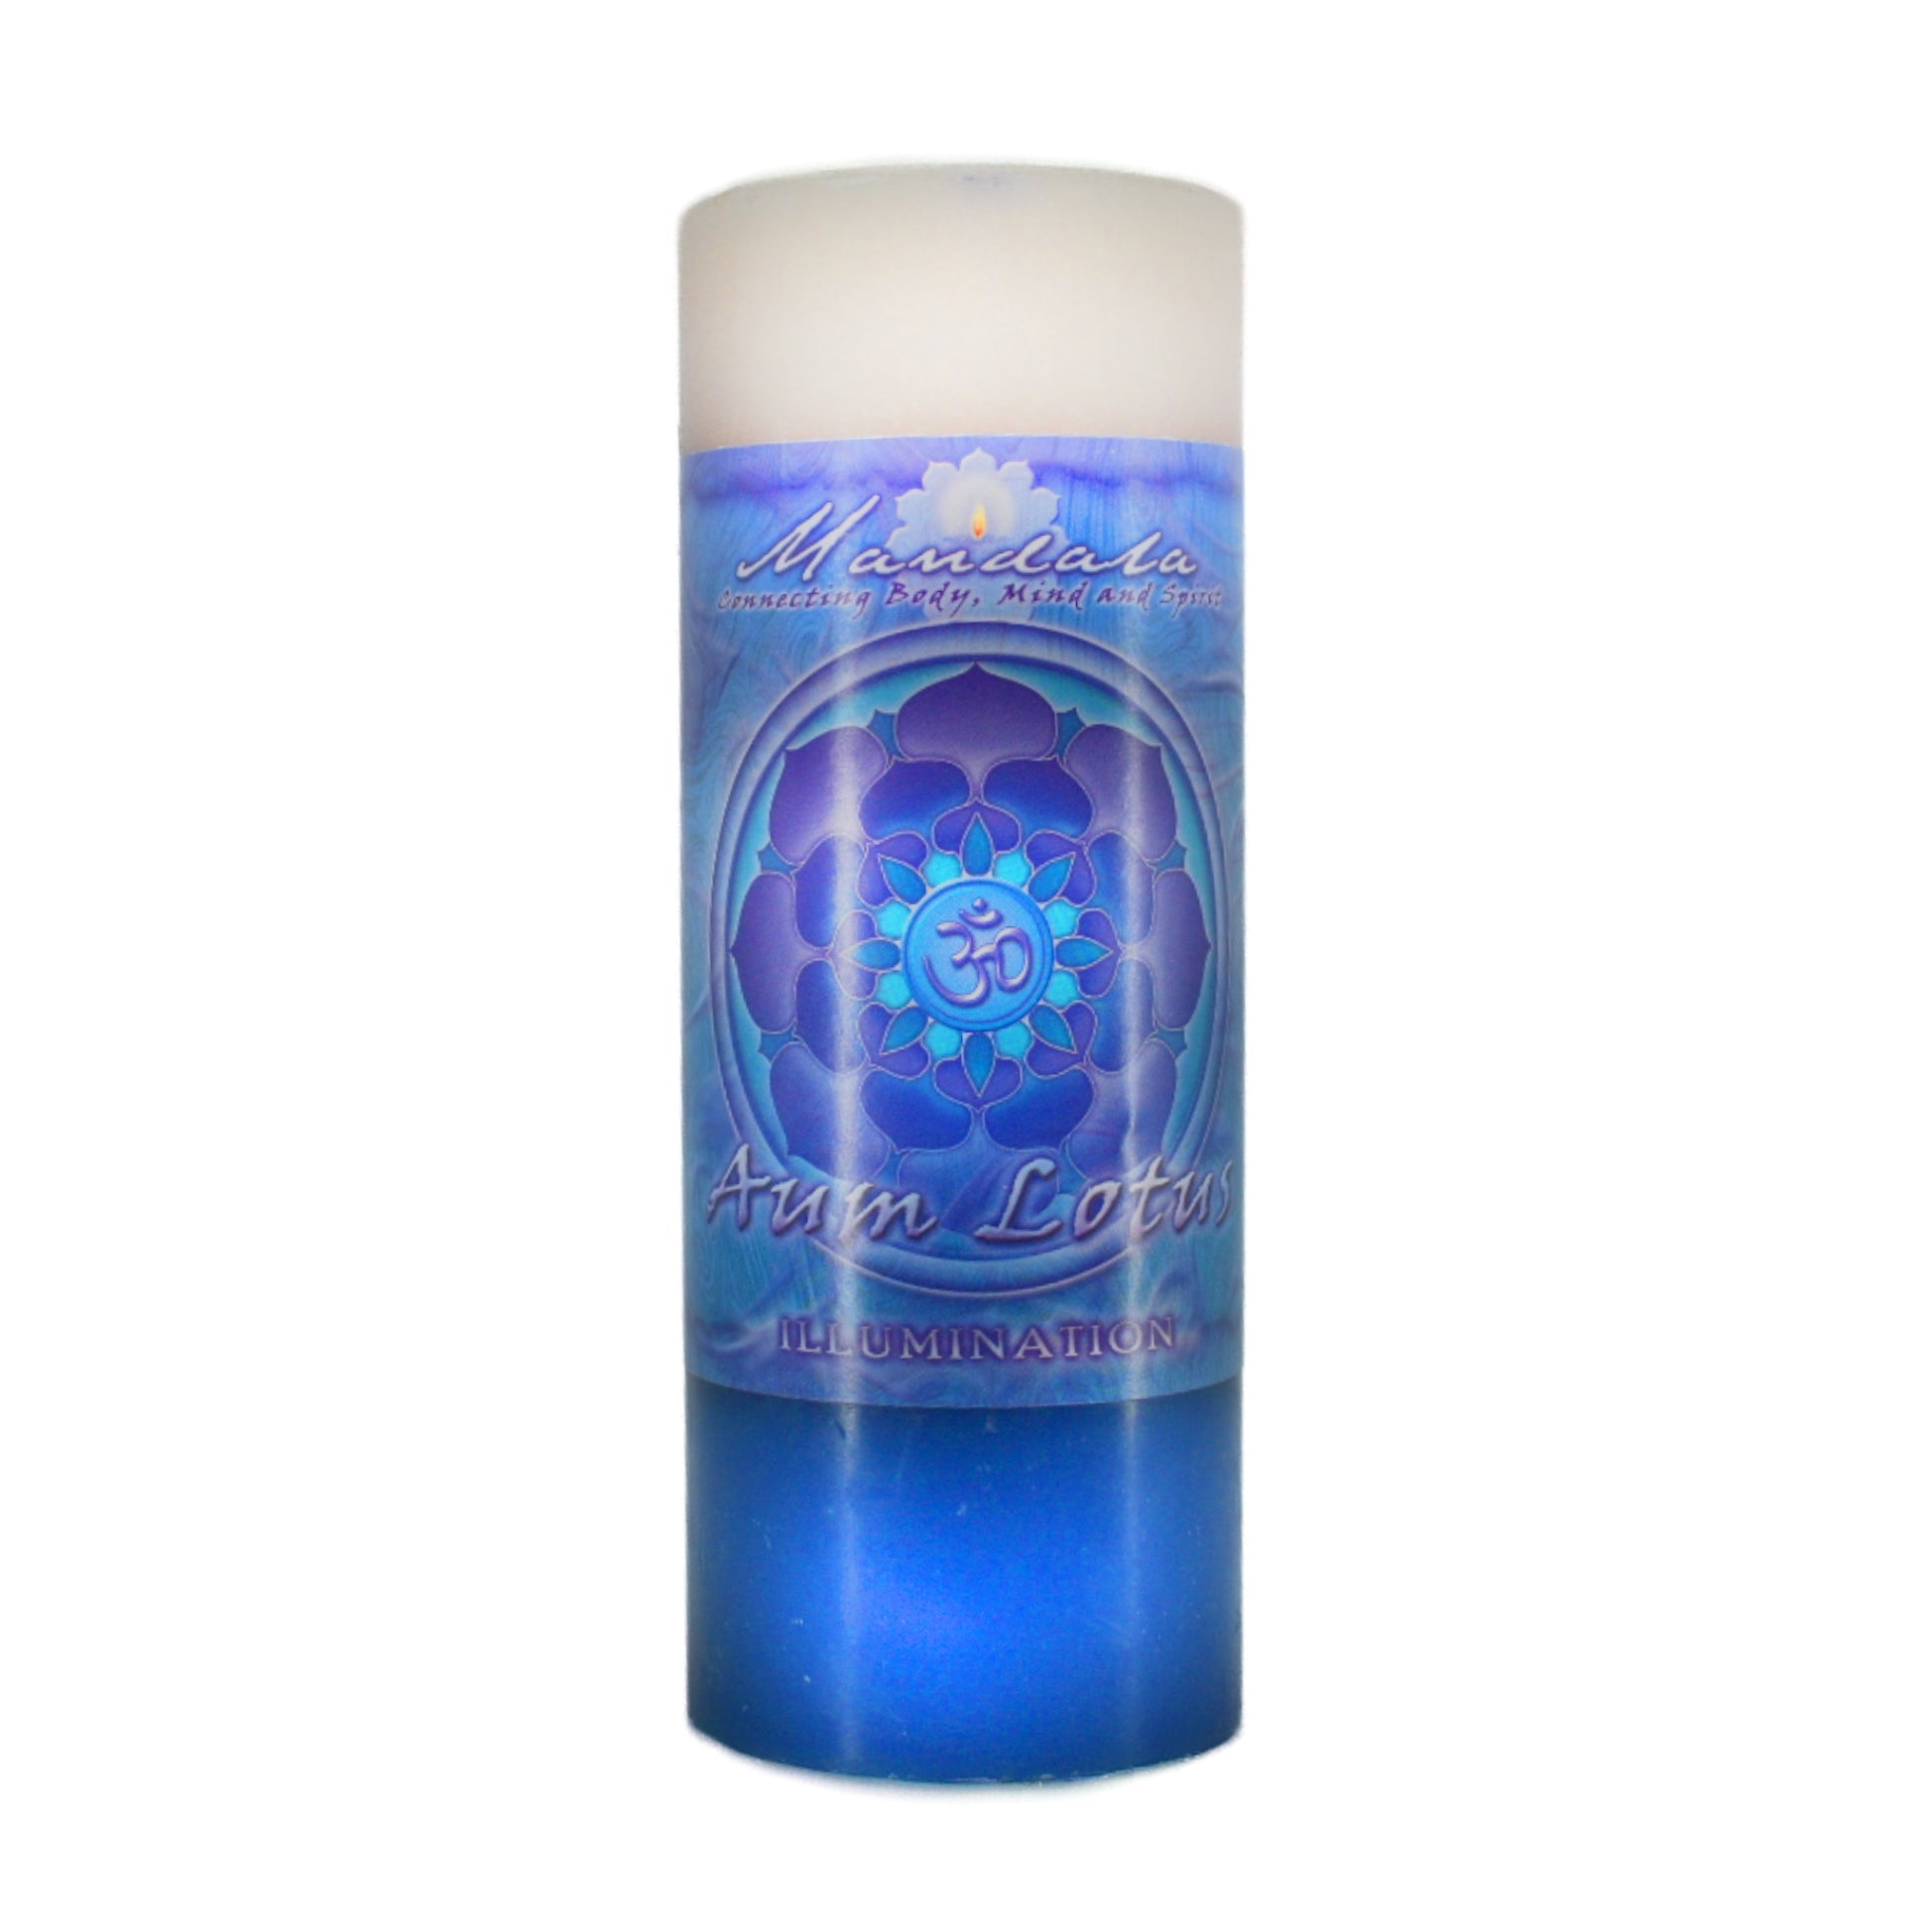 Illumination Mandala Candle.  Burn the candle to enhance: Truth & illumination, spiritual insight, and higher awareness and intent.  Scented with East Indian sandalwood, patchouli and amber.  Candle is white at the top and blue at the bottom.